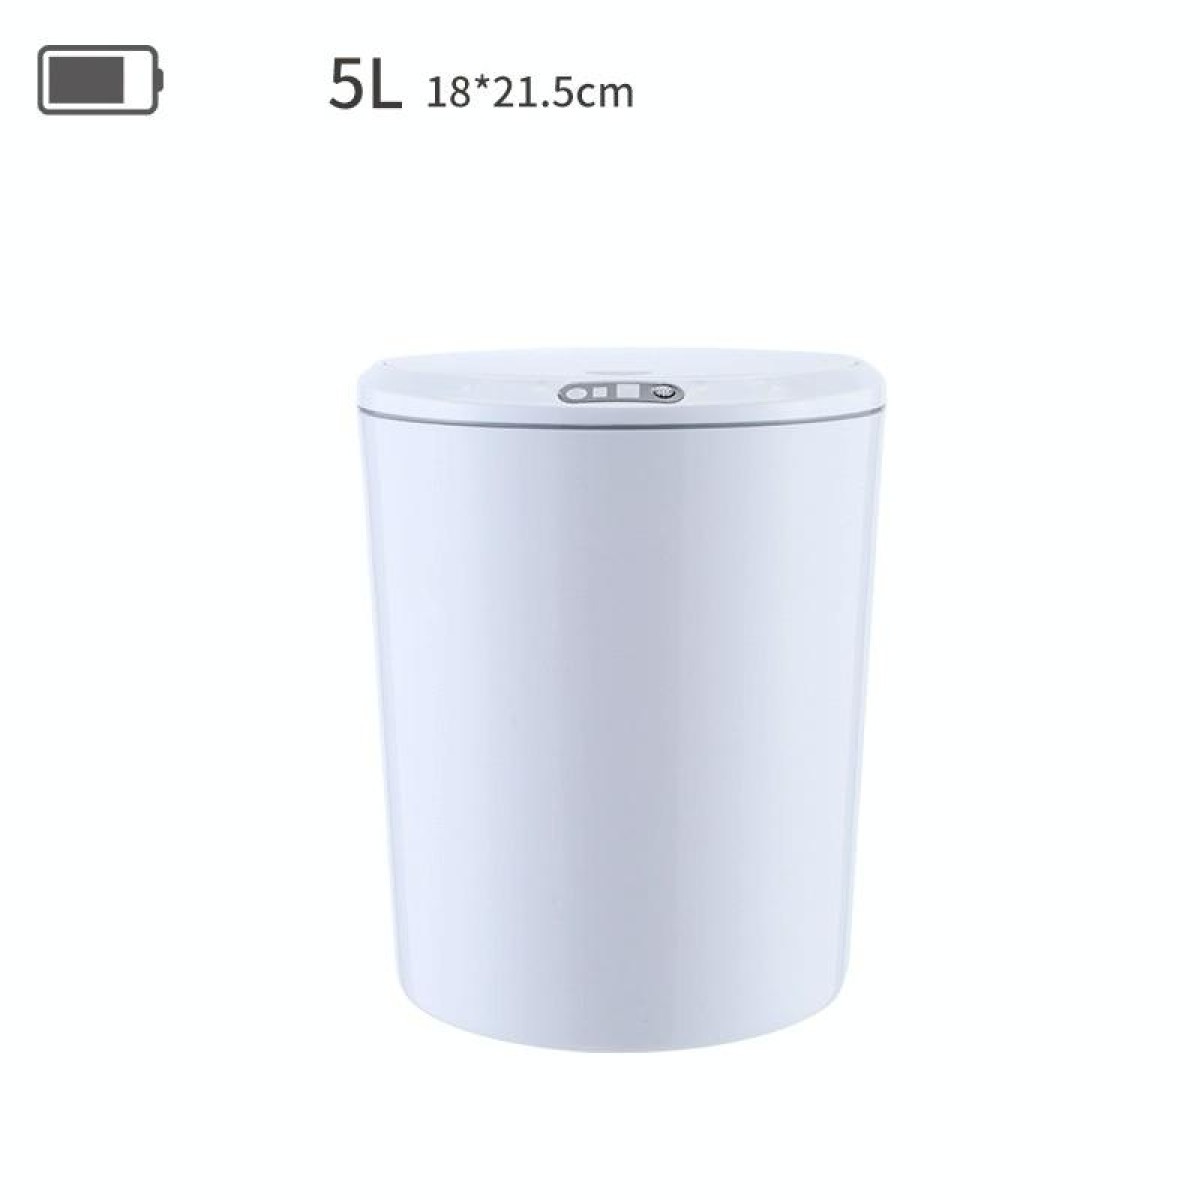 EXPED SMART Desktop Smart Induction Electric Storage Box Car Office Trash Can, Specification: 5L Battery Version (White)